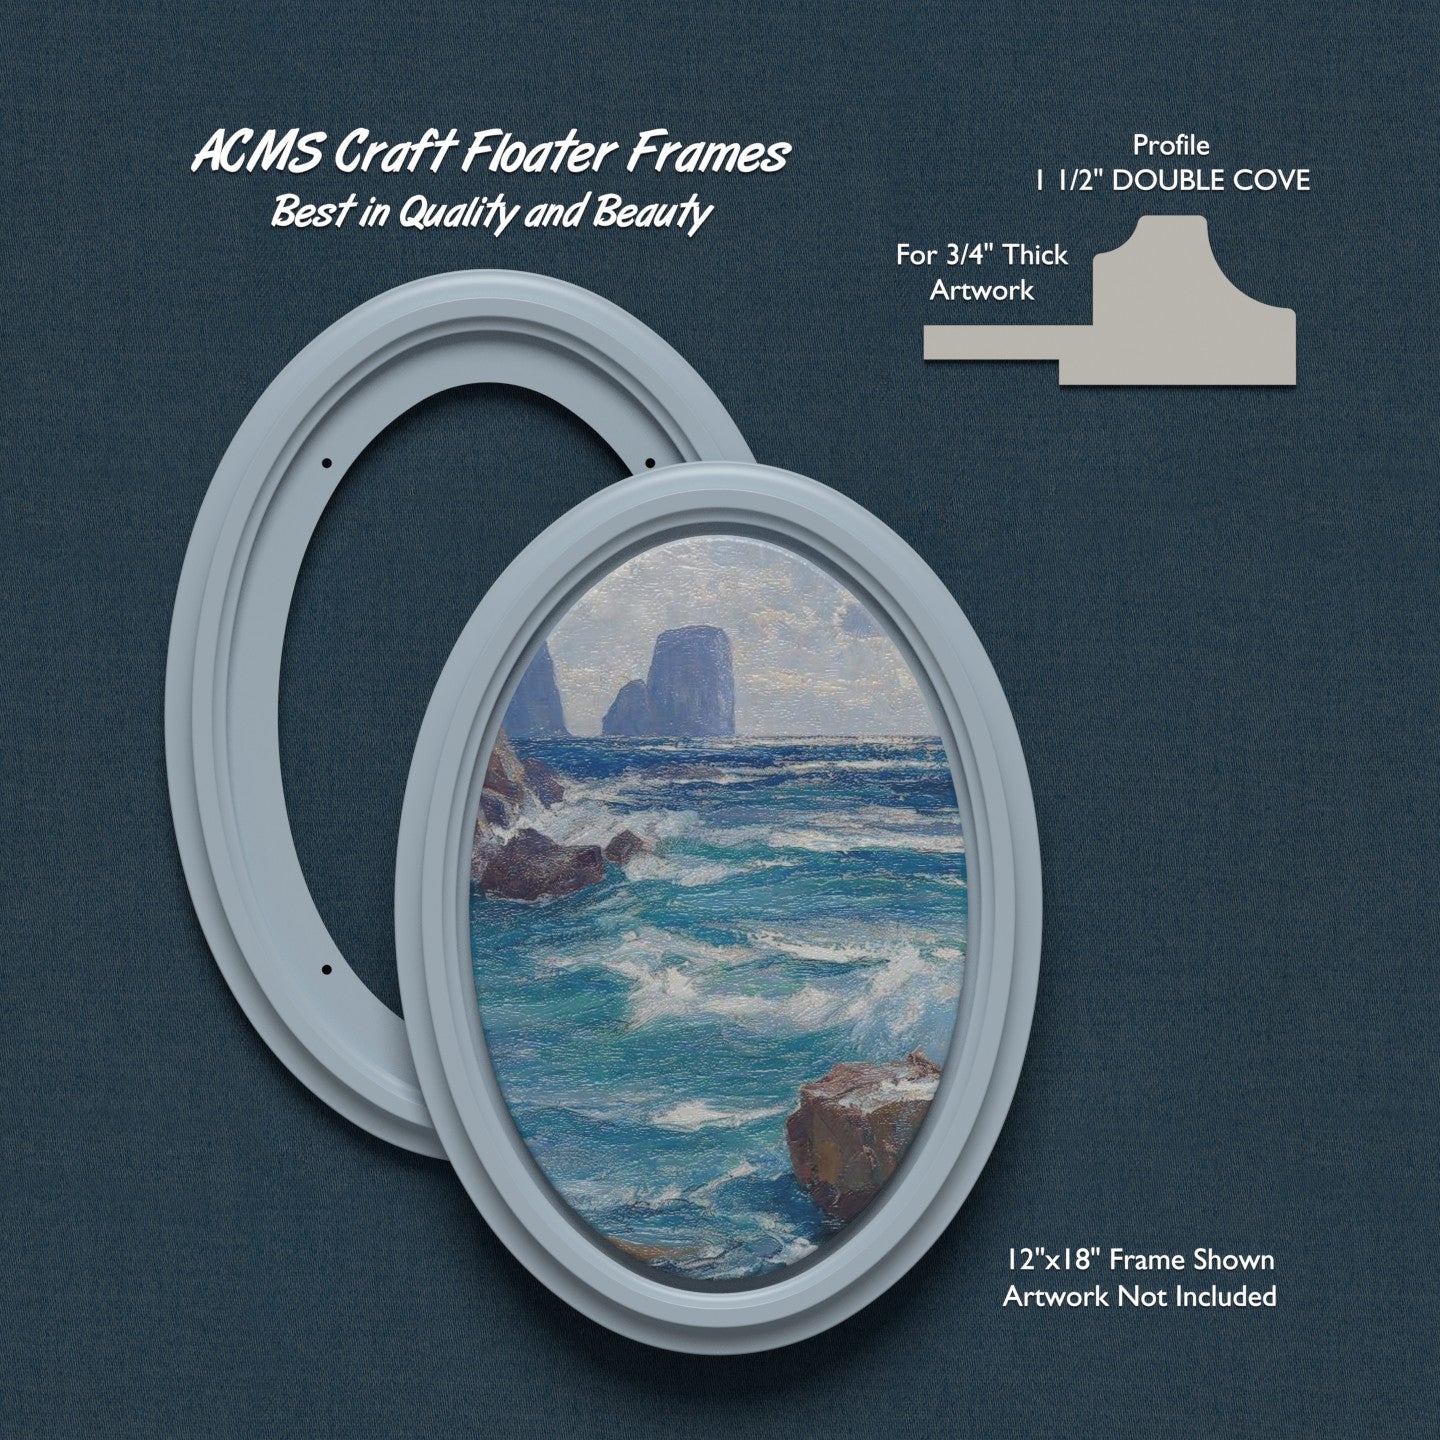 ACMS Oval Craft Floater Frame - For 3/4" Thick Artwork - Profile 1 1/2" DOUBLE COVE - 1 1/4" Thick Frame